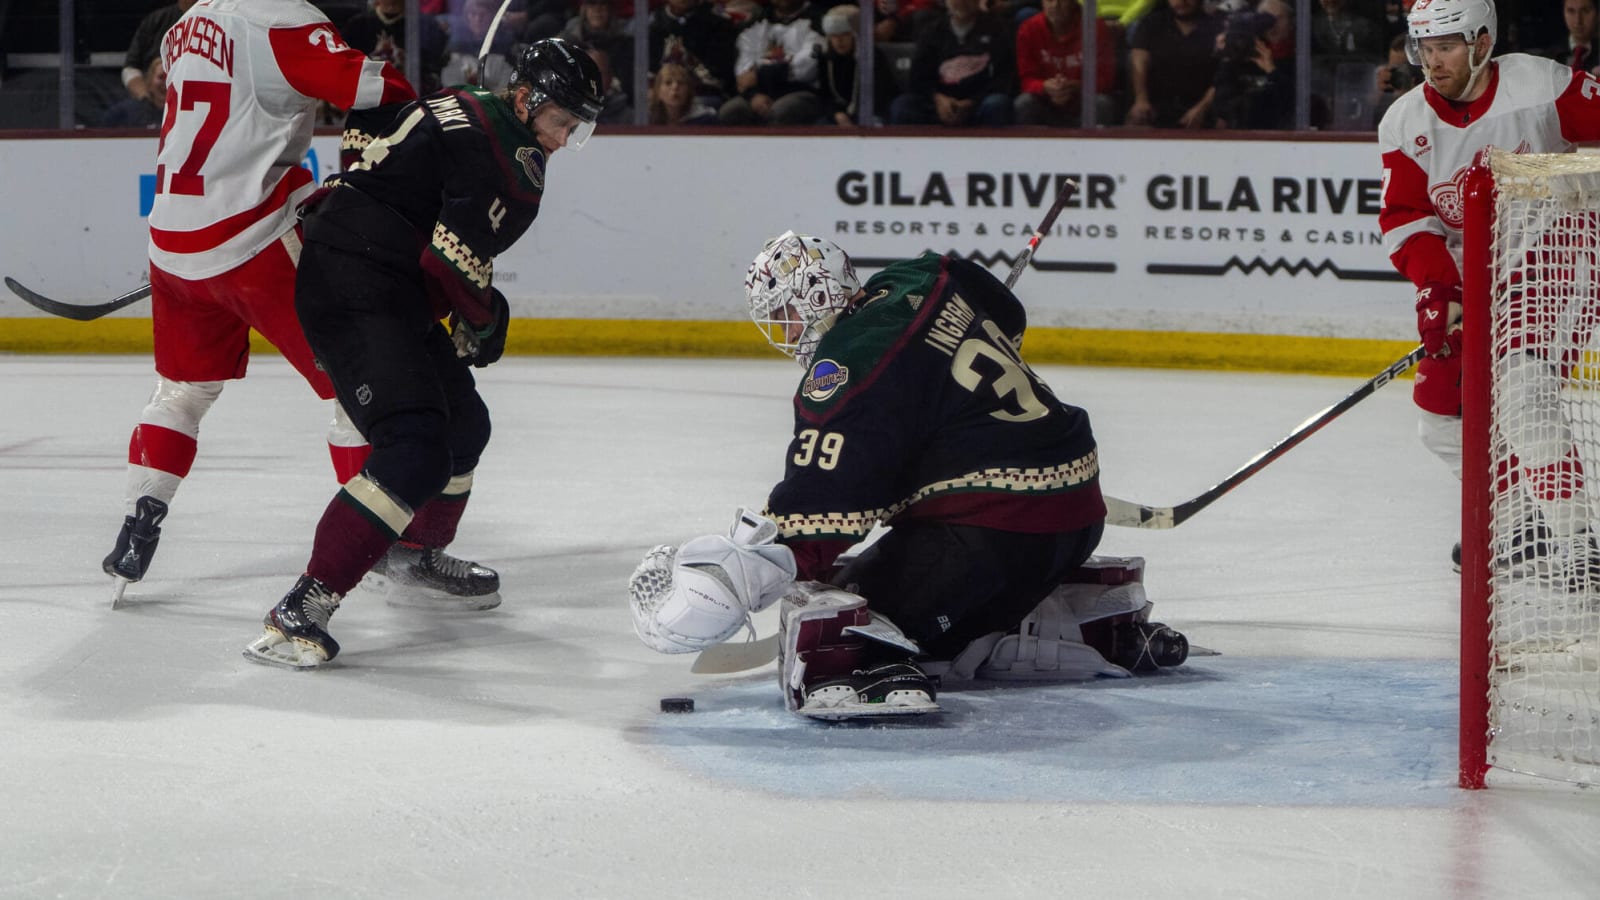 Ingram’s Shutout Carries Coyotes to Win Over Red Wings